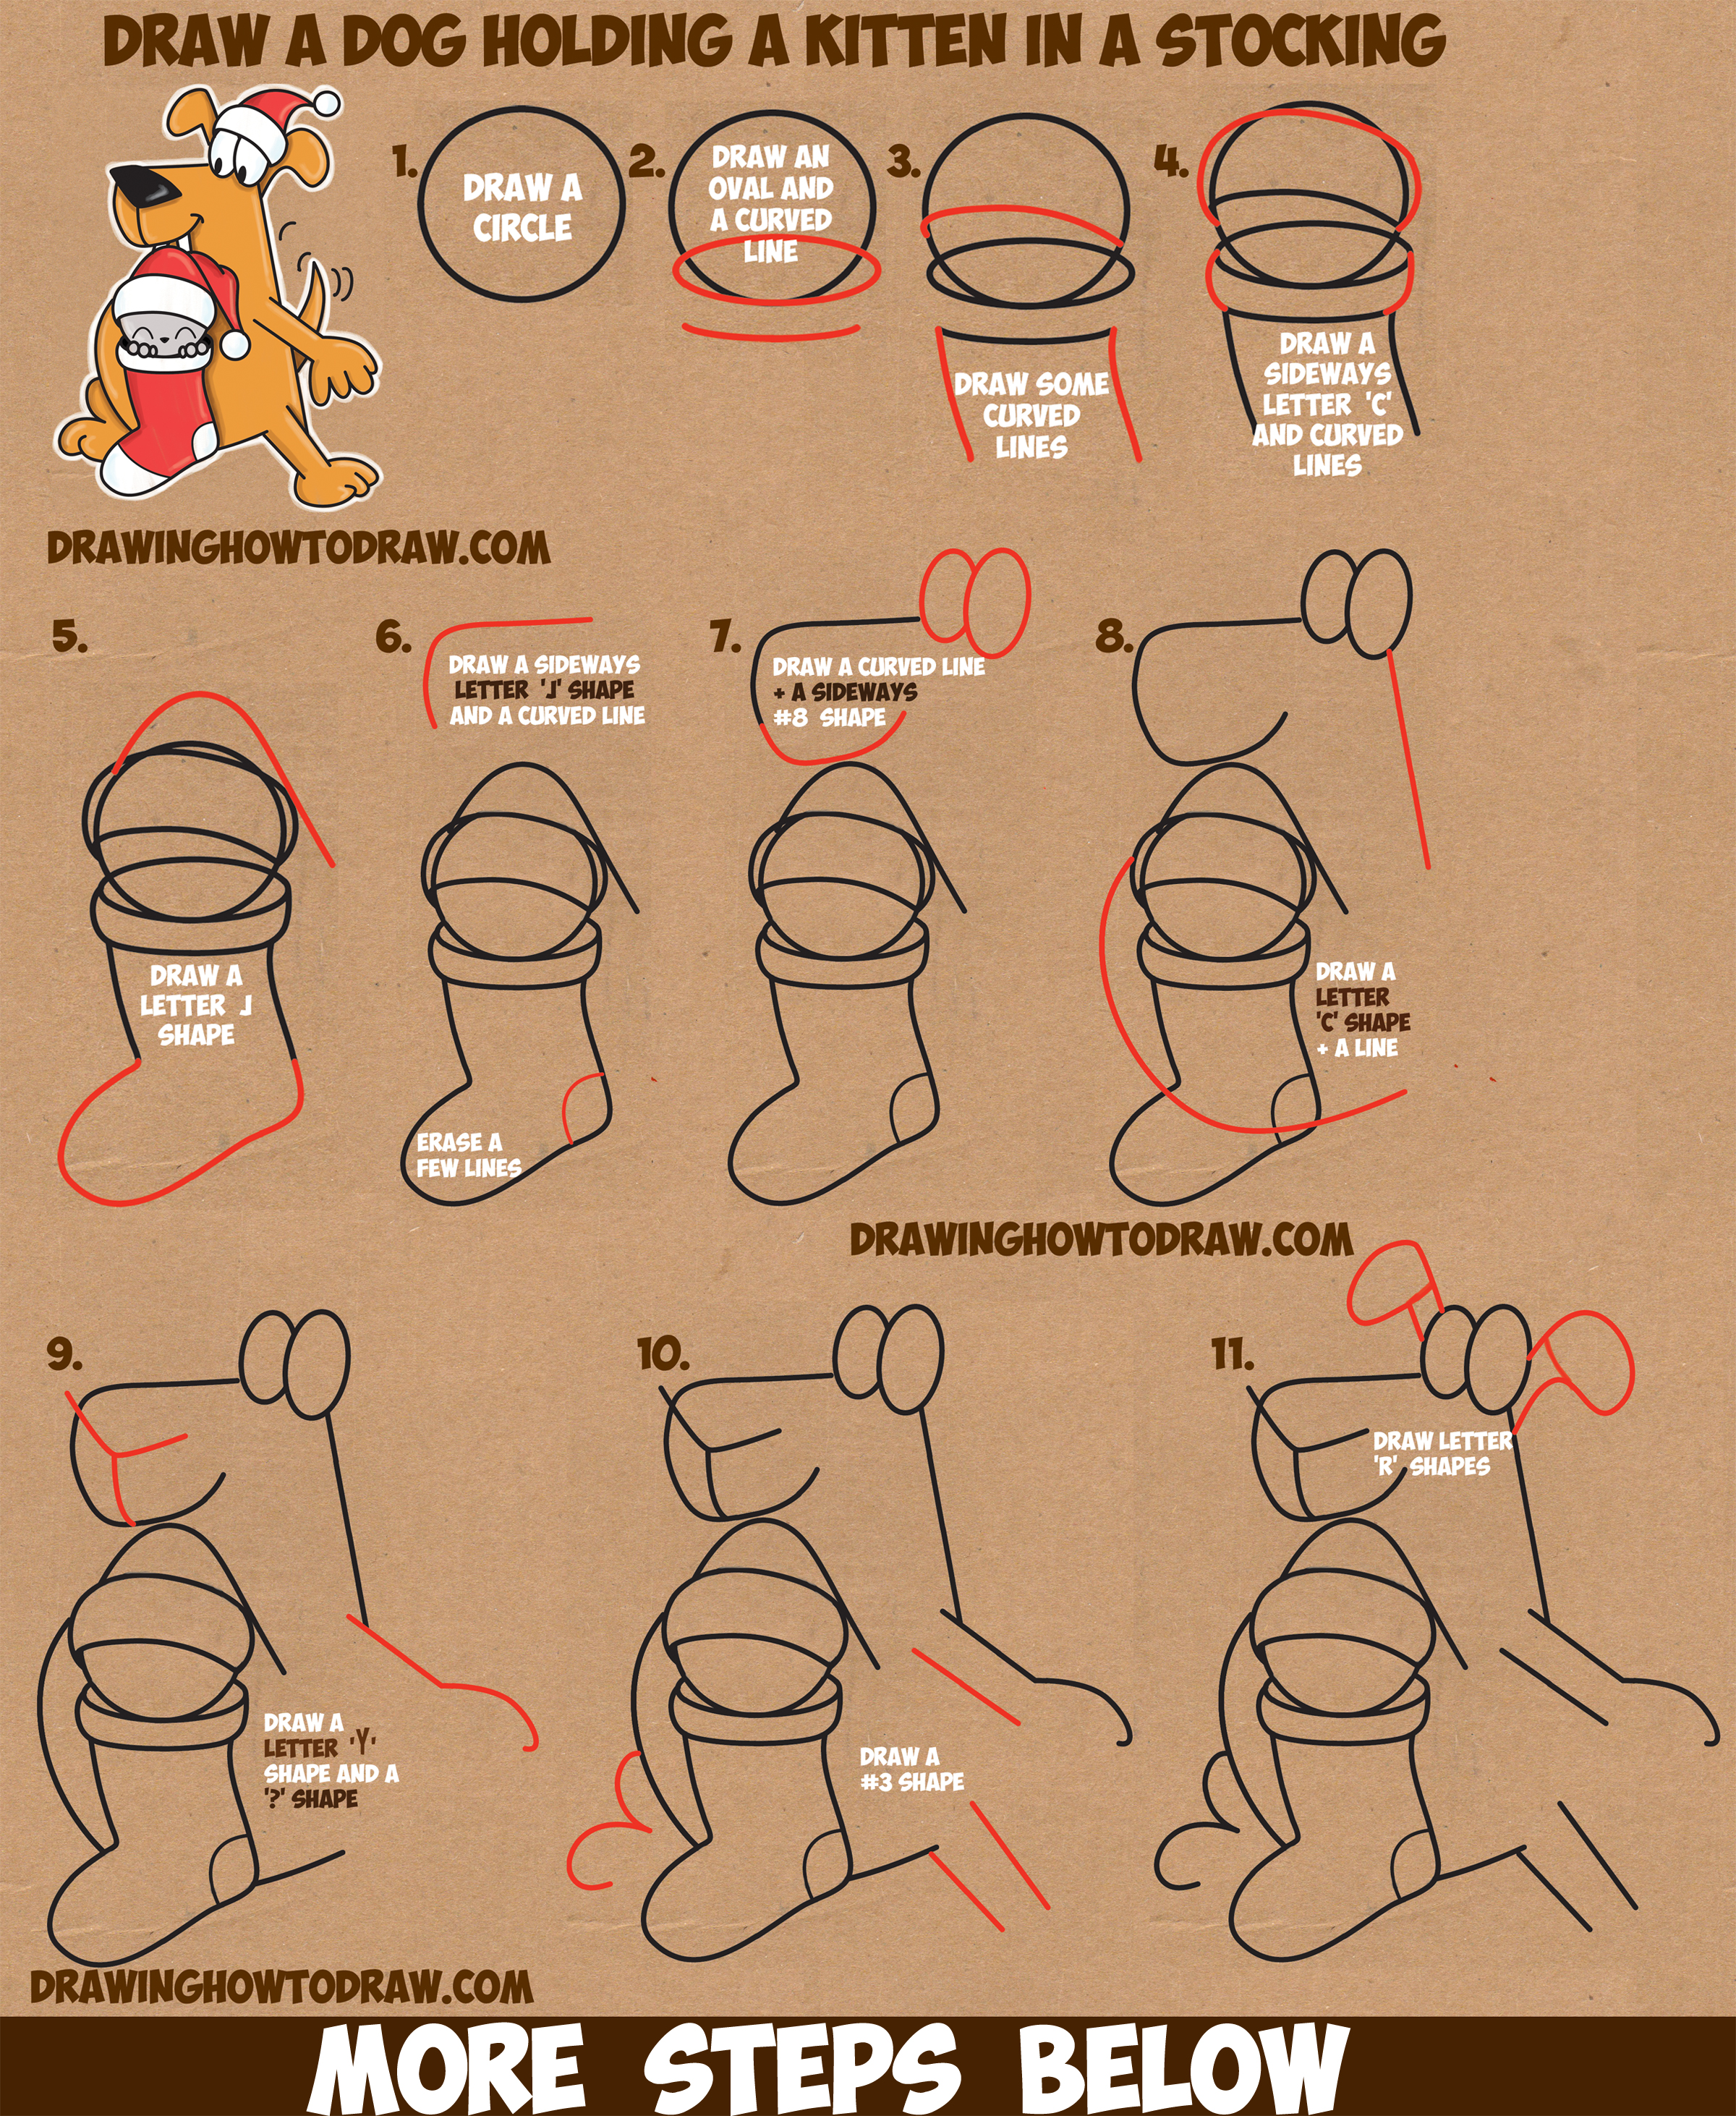 How to Draw a Cartoon Dog Holding a Cute Kawaii Kitten / Cat in a Christmas Stocking - Easy Step by Step Drawing Tutorial for Kids